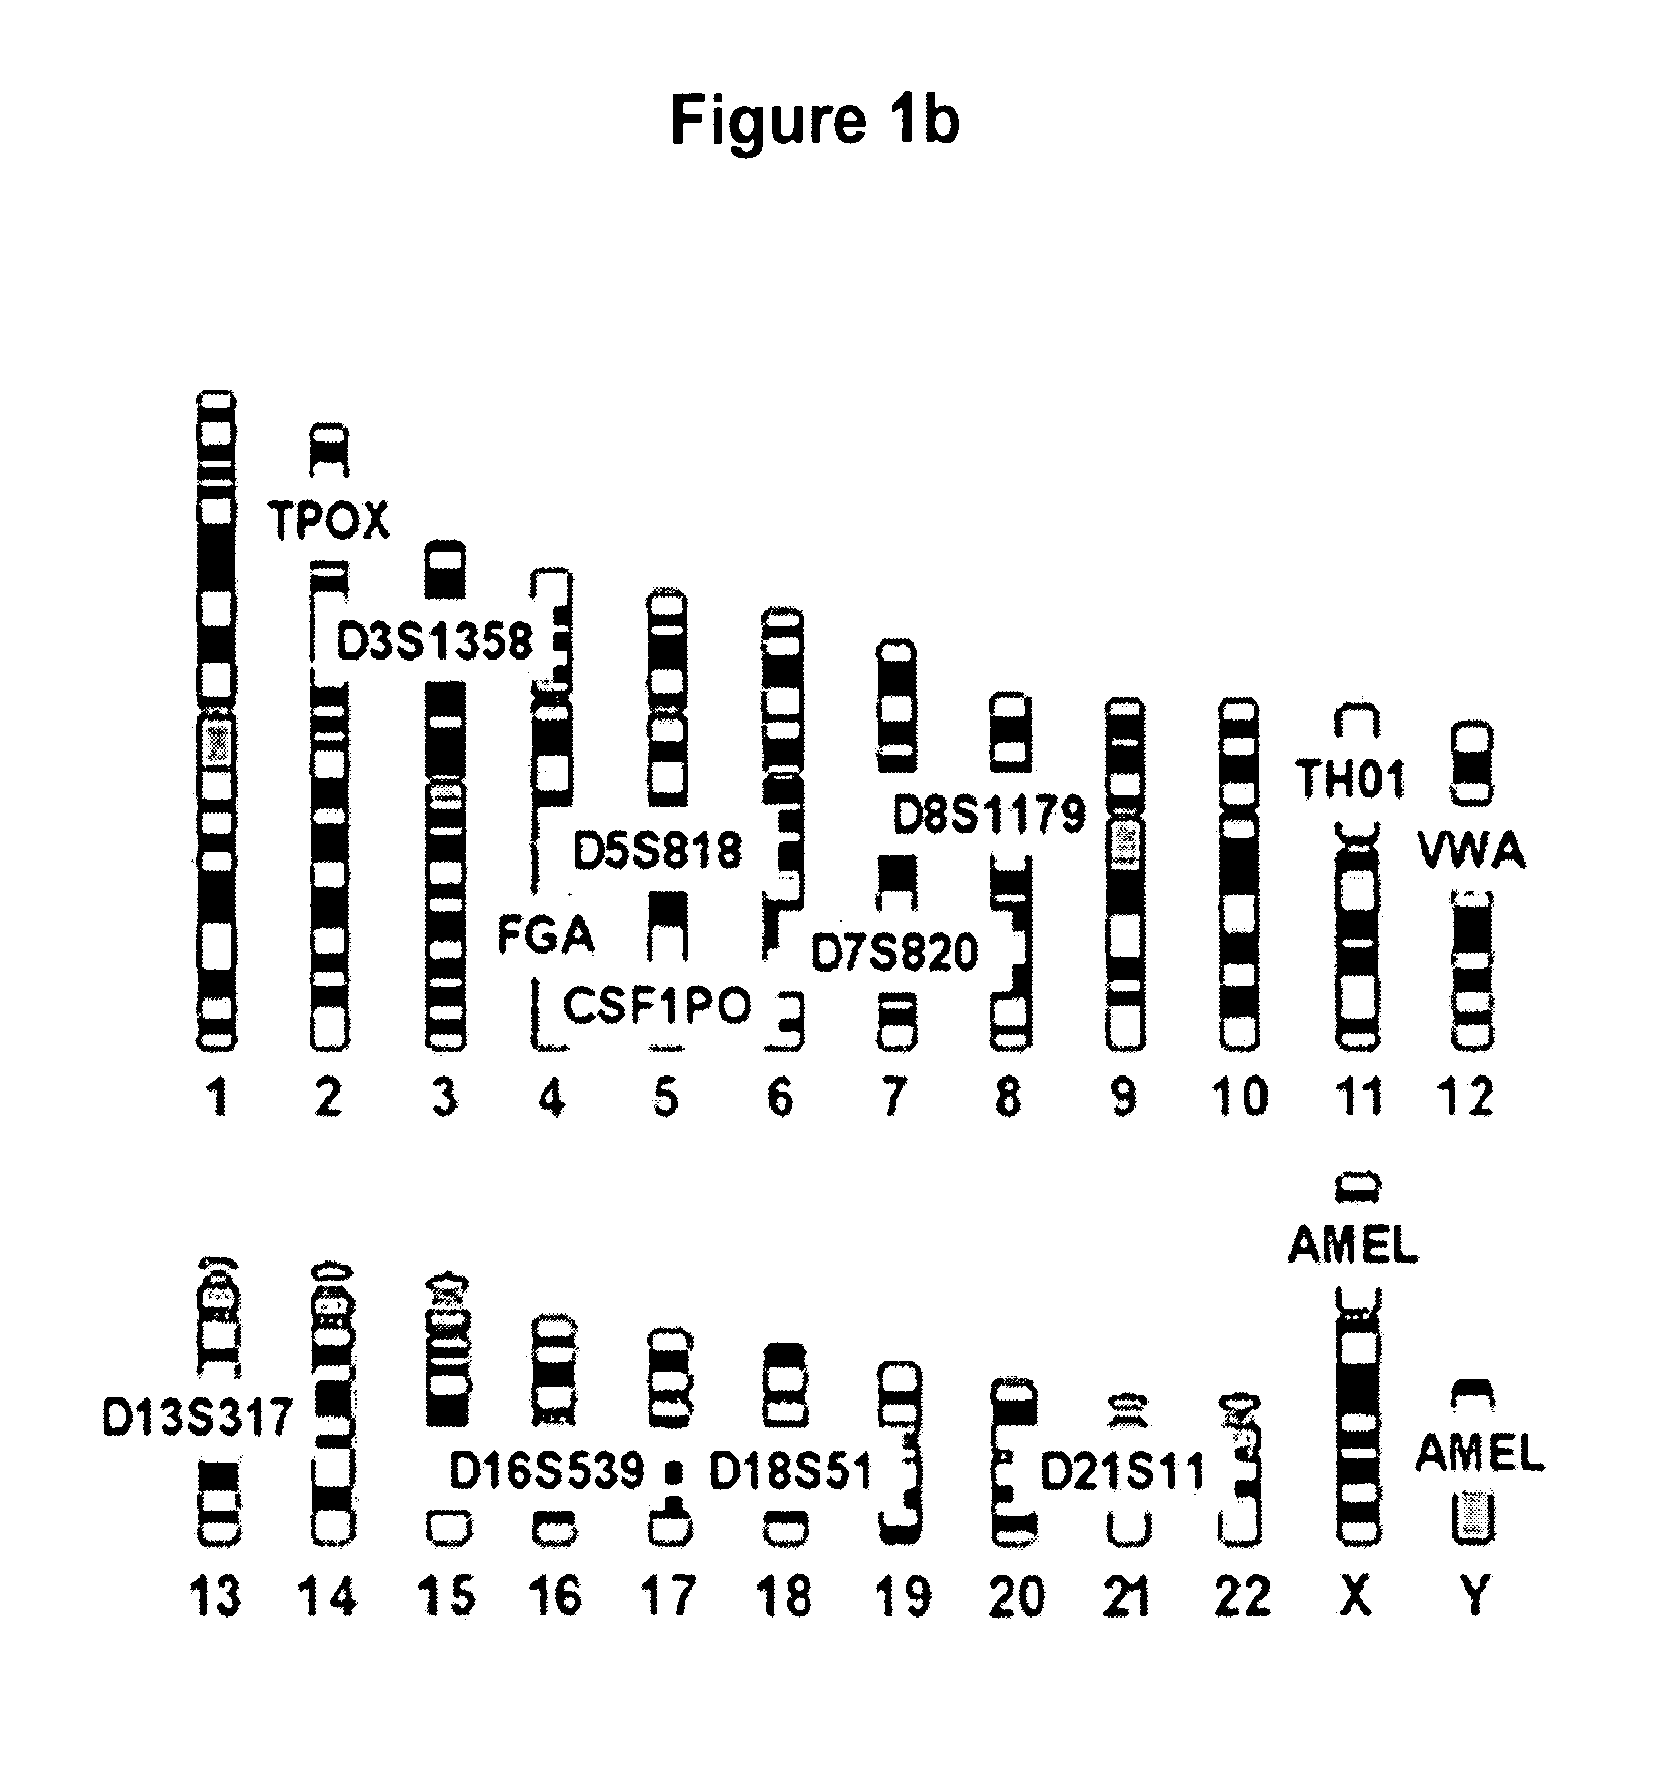 Methods for rapid forensic DNA analysis